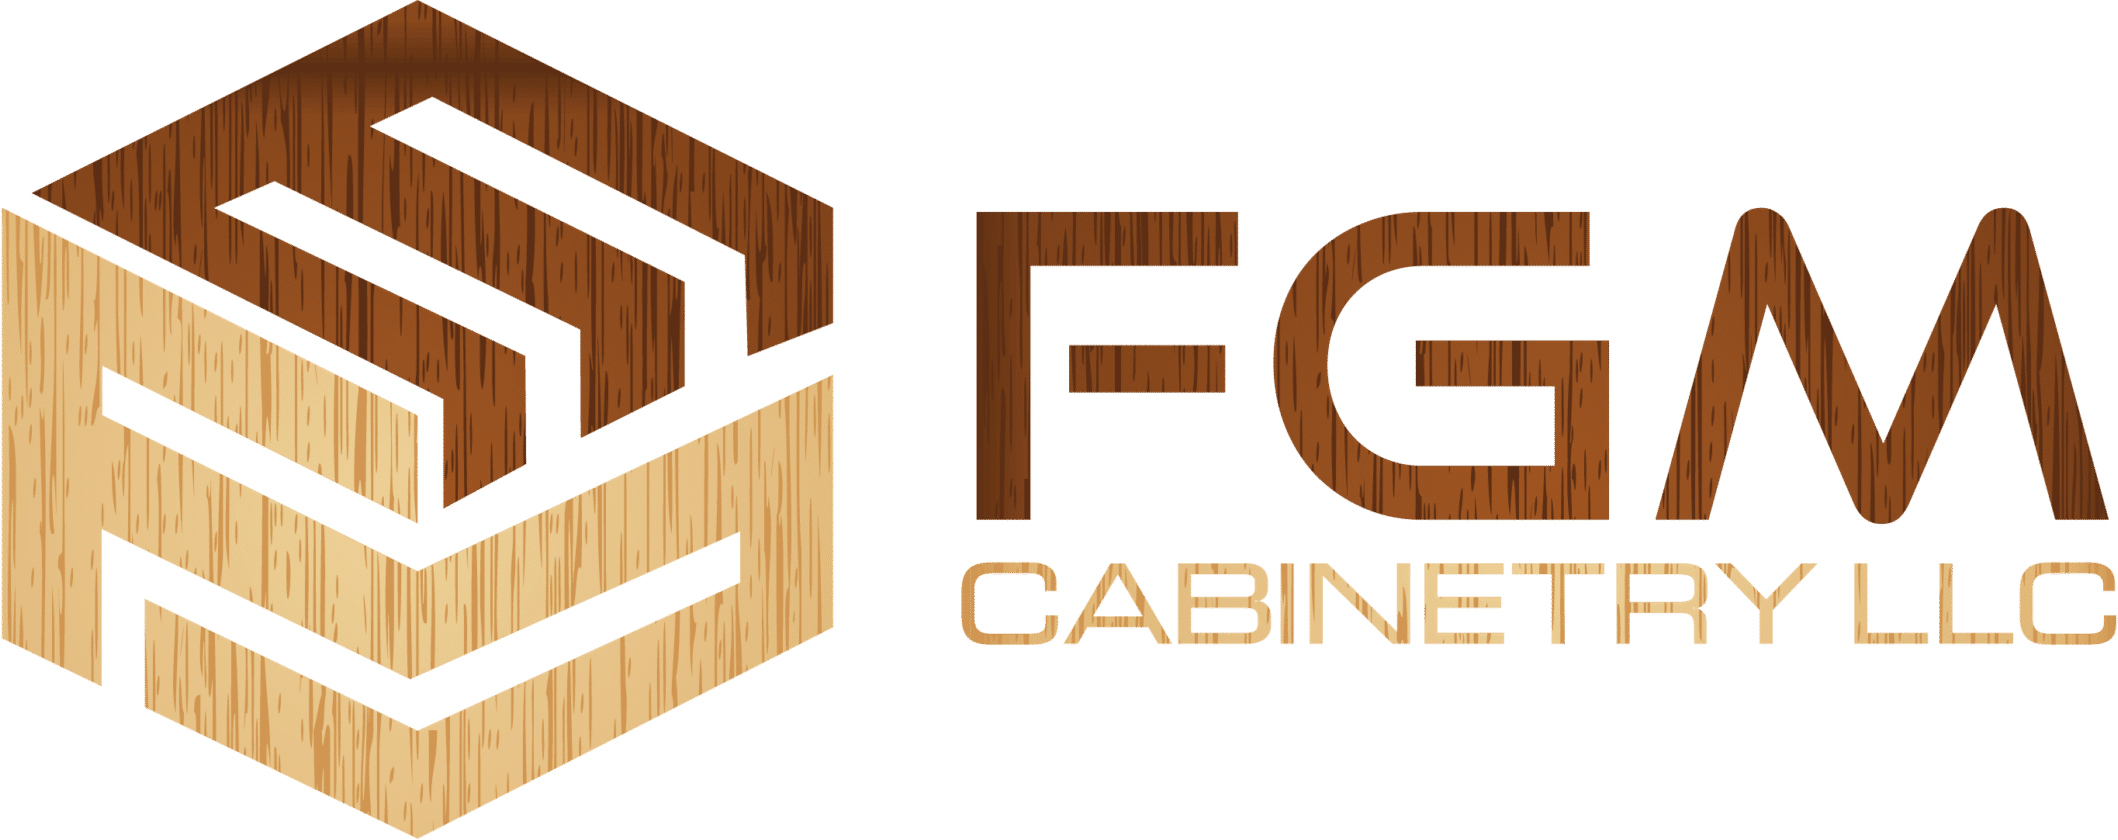 FGM Cabinetry Logo